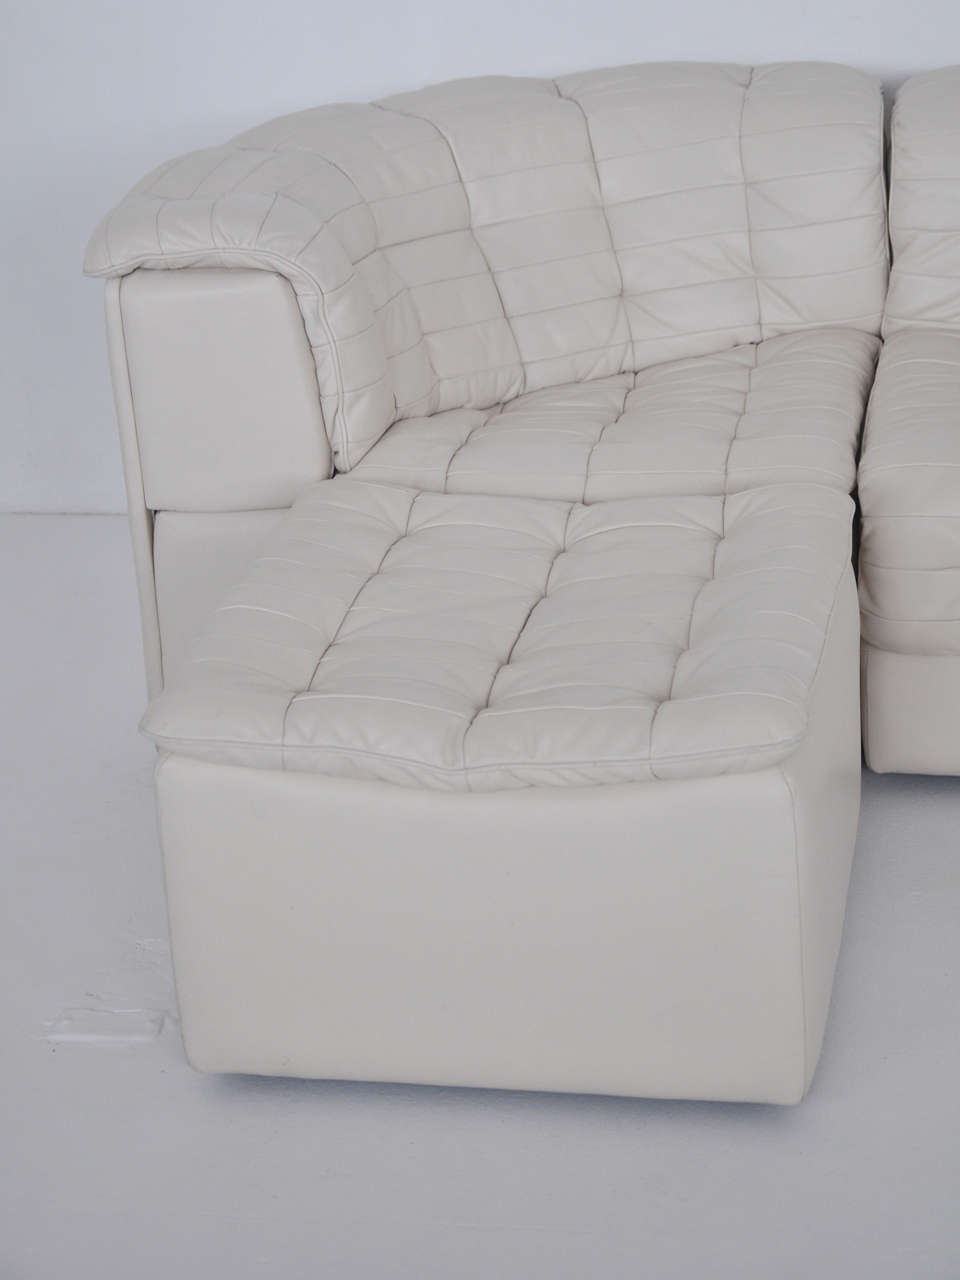 20th Century De Sede White Leather Sectional Sofa